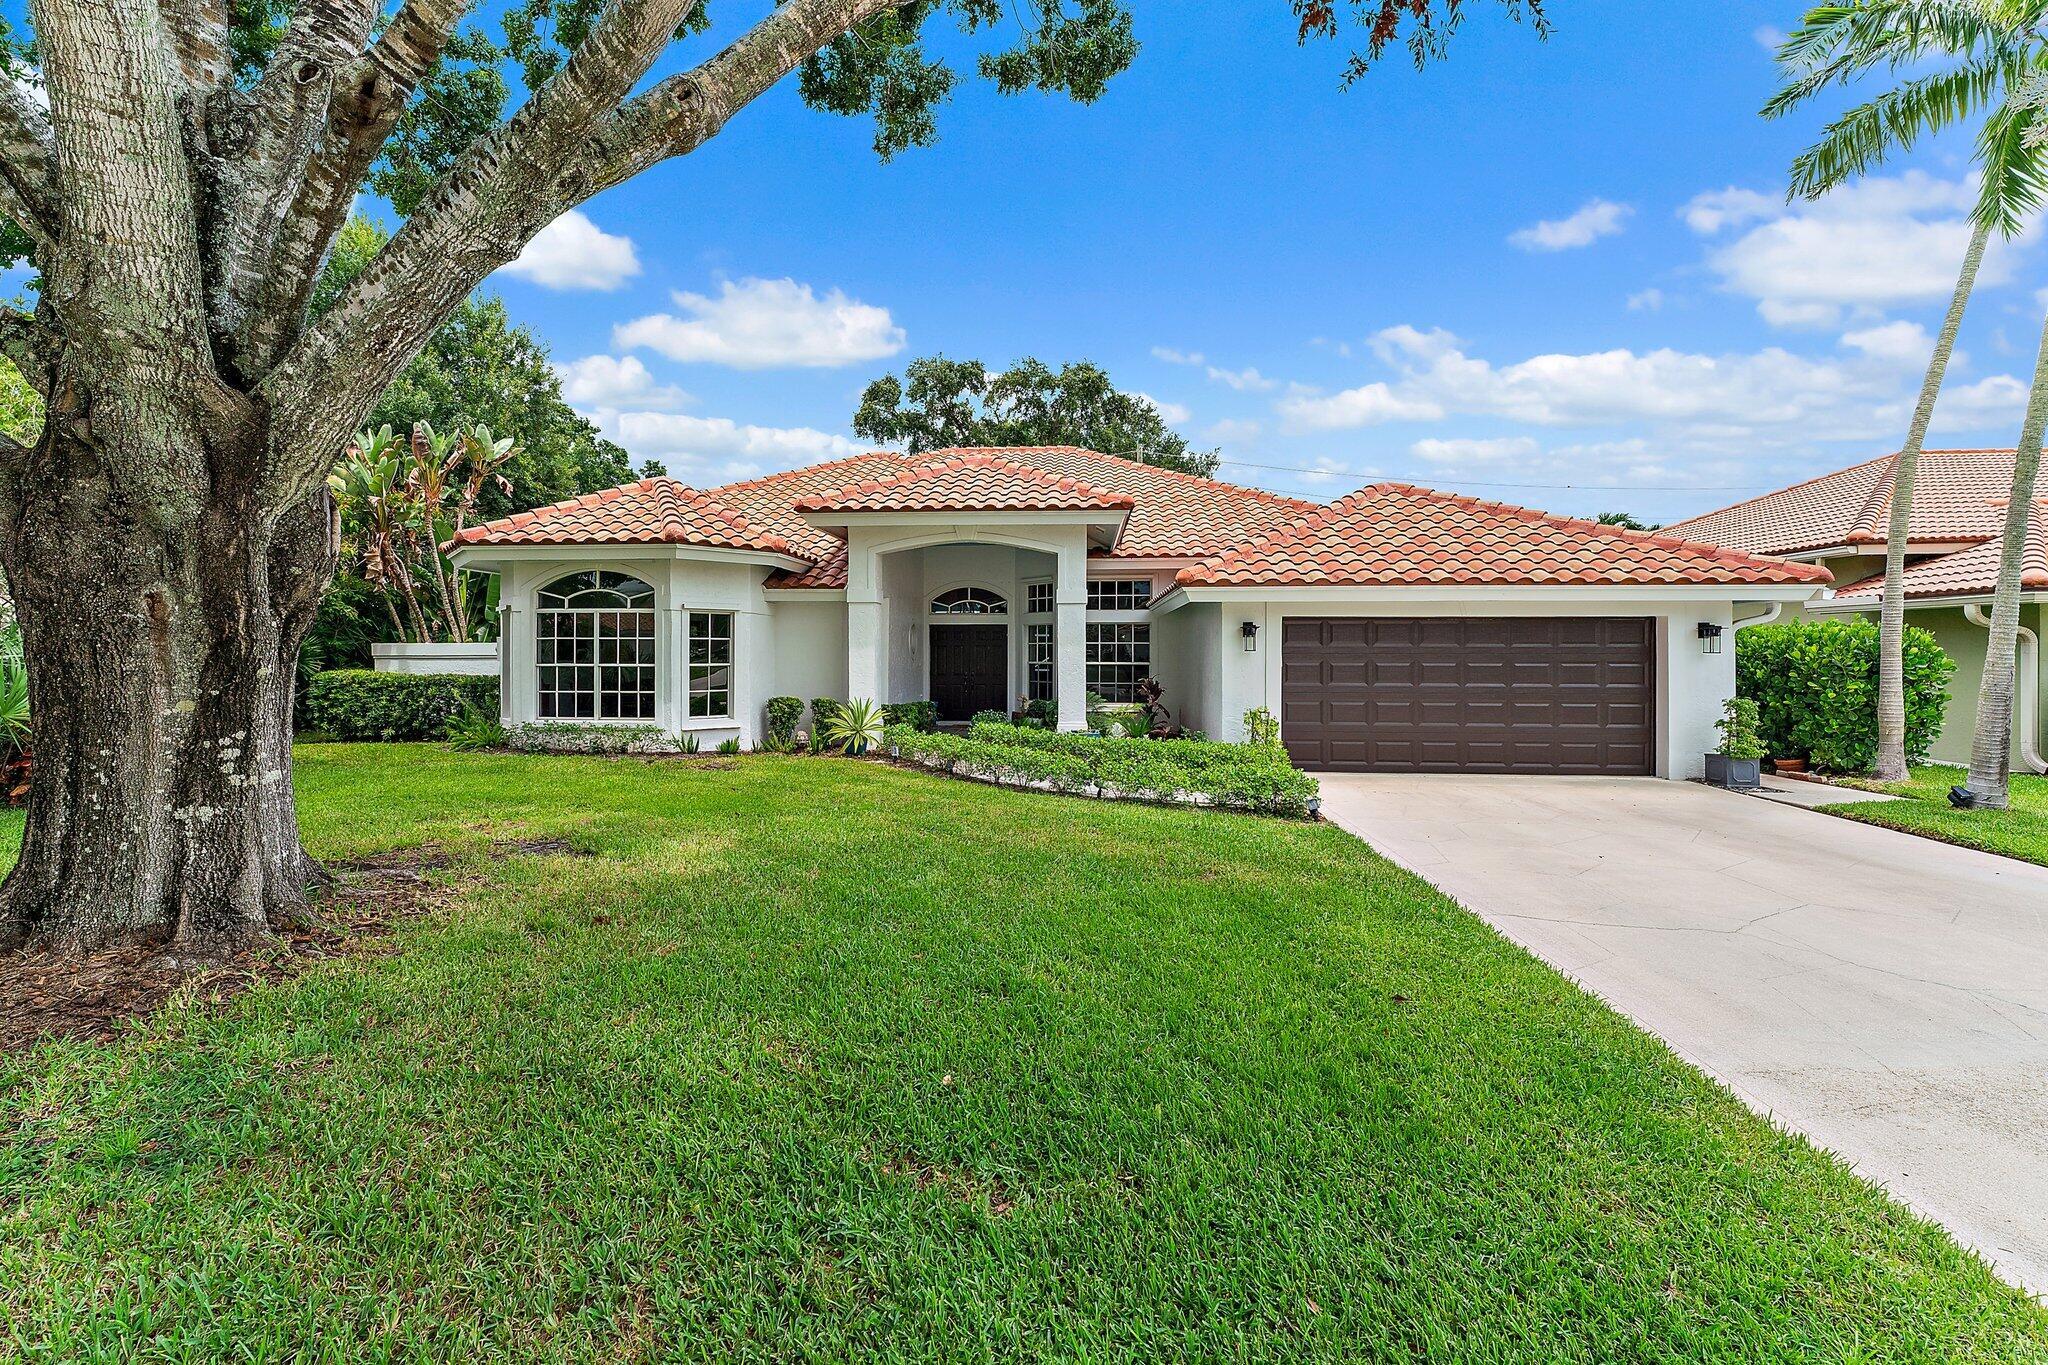 This property is located behind the private gates of Shorewood Estates, one of the most exclusive sections of The Shores, a highly sought-after community in Jupiter.  Some of the special features include: a salt water pool which was resurfaced 18 months ago with all new pumps and filters; the roof was replaced 4 years old;  the entire property was freshly painted inside and out; a new walkway was installed, along with all new electric outlets, switches, ceiling lights and fans.  Come experience the best of Jupiter at this fabulous property where peace and tranquility is offered near the best of Jupiter's family friendly lifestyle.